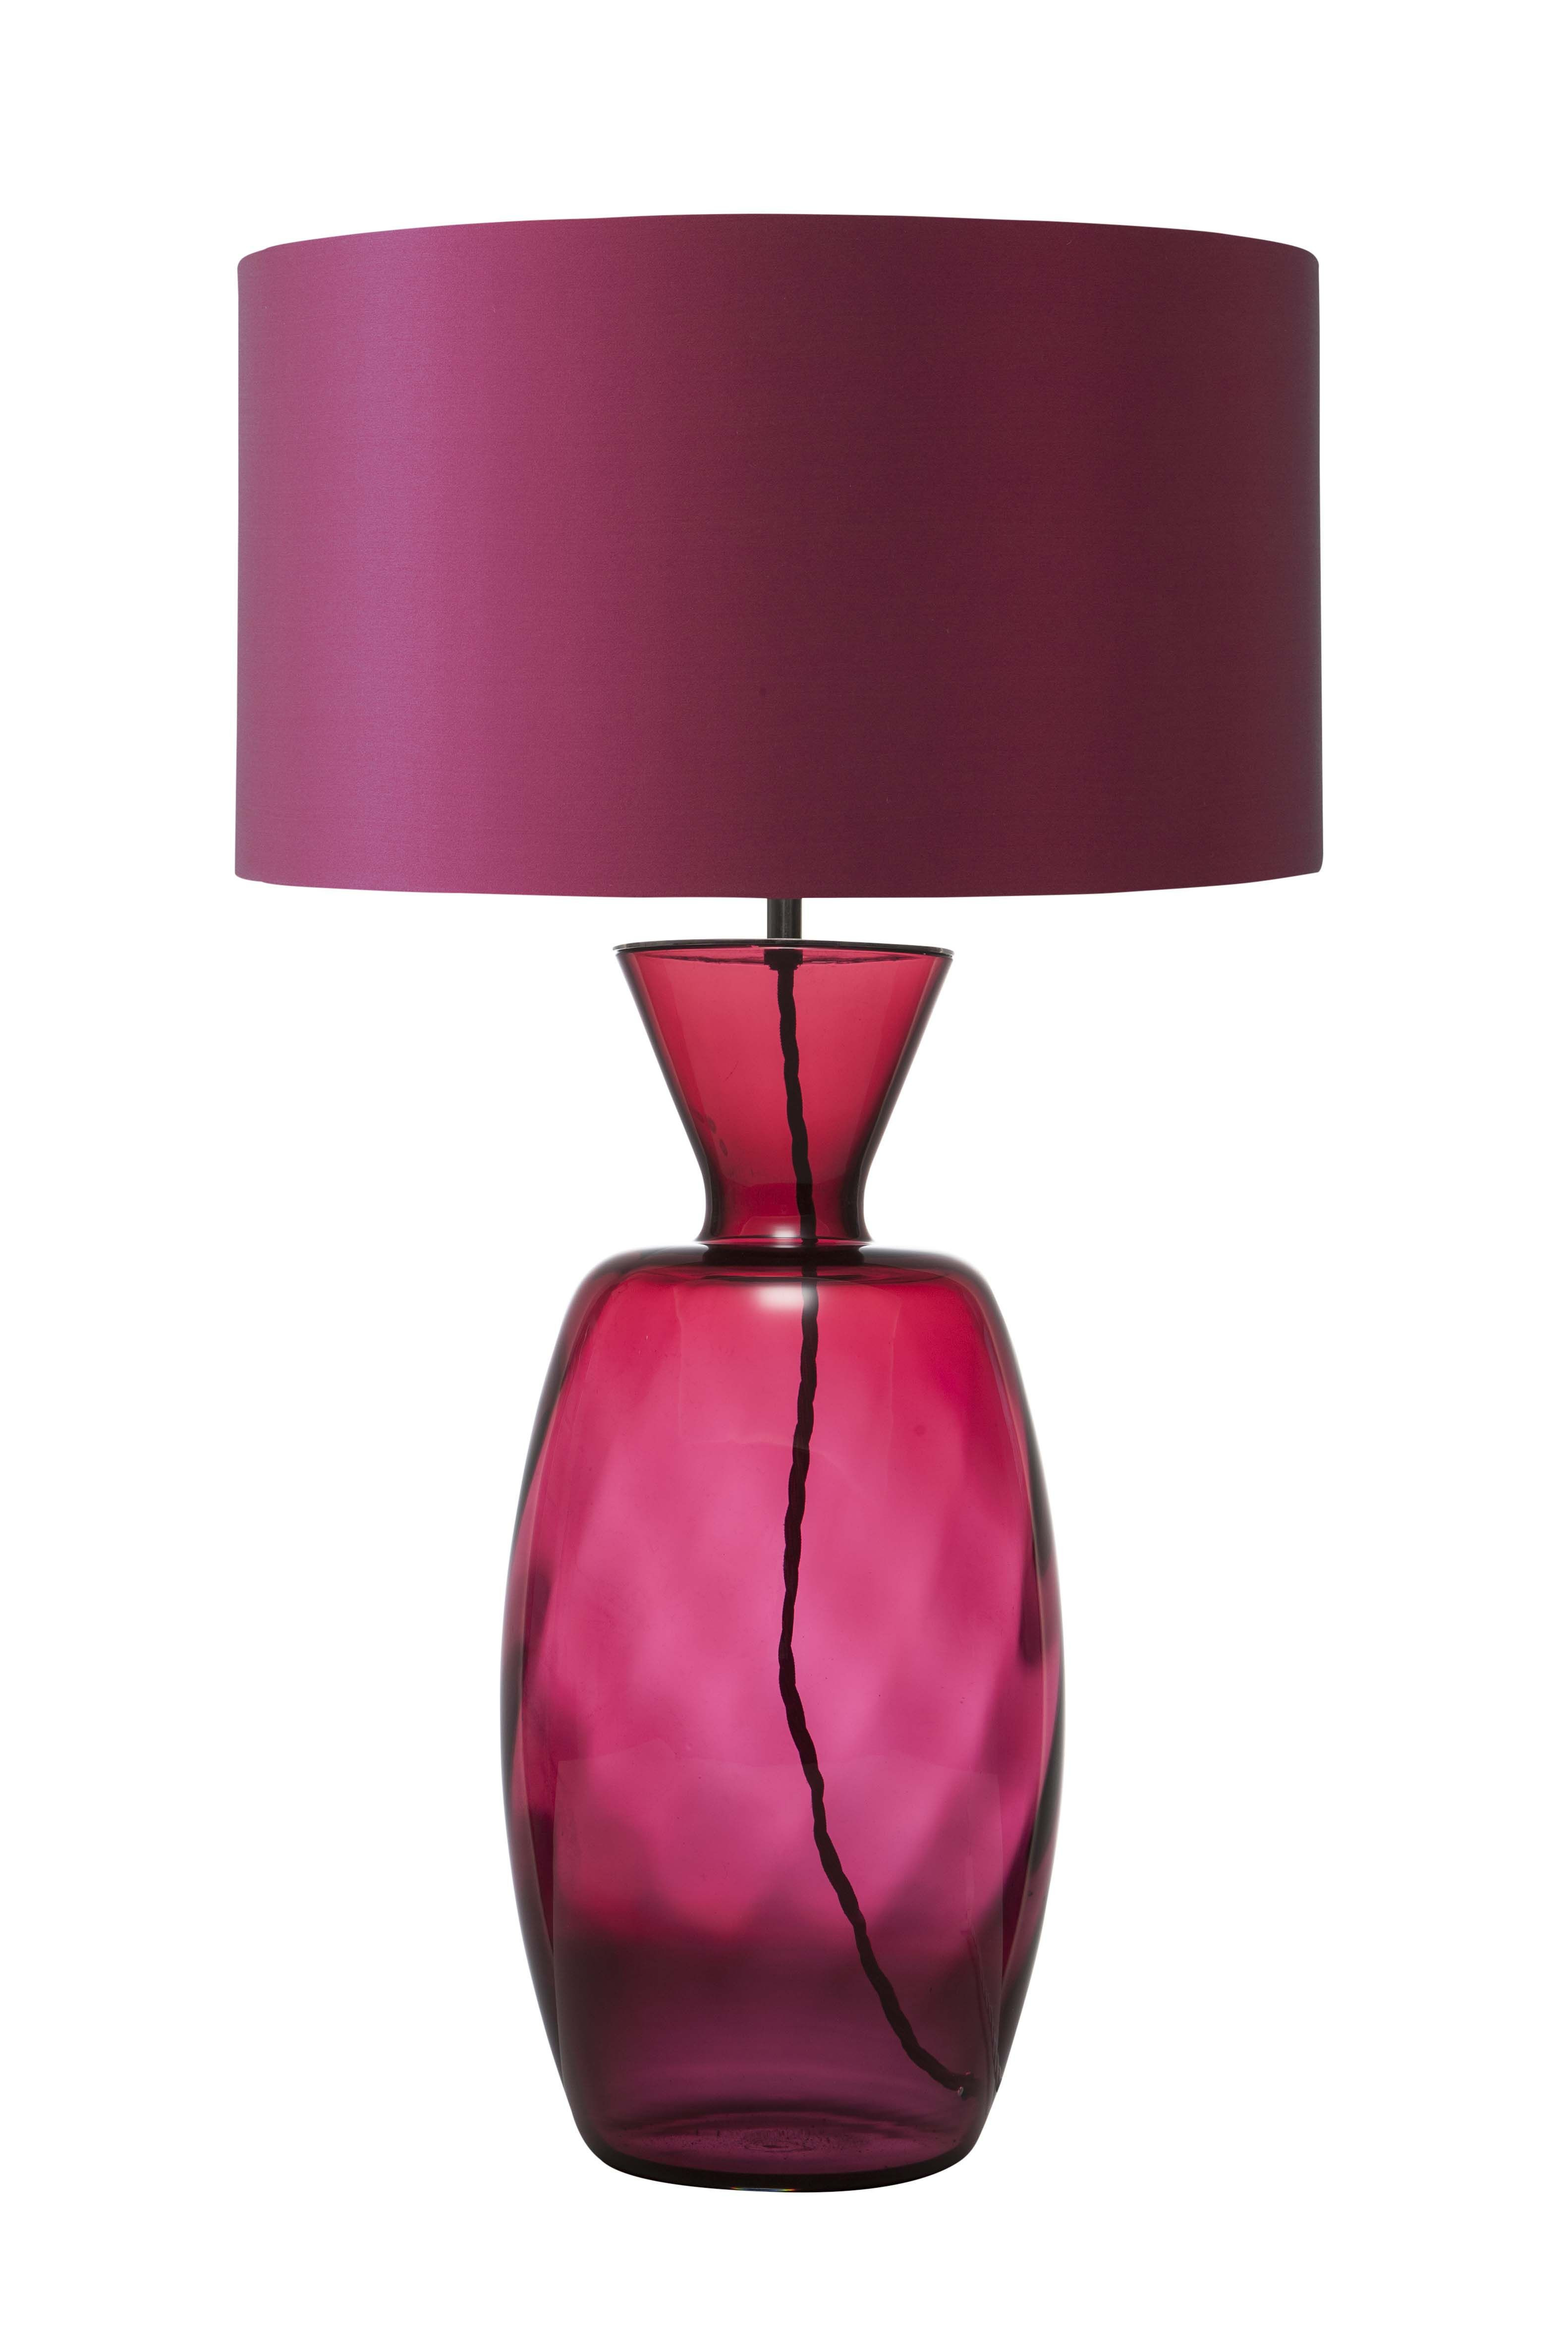 24 Cute Ruby Red Vase 2024 free download ruby red vase of 15 new red ceramic table lamp wonderfull lighting world inside red ceramic table lamp new positano table lamp ruby red ac2a7 ac2afac2a5ac2b7 pinterest